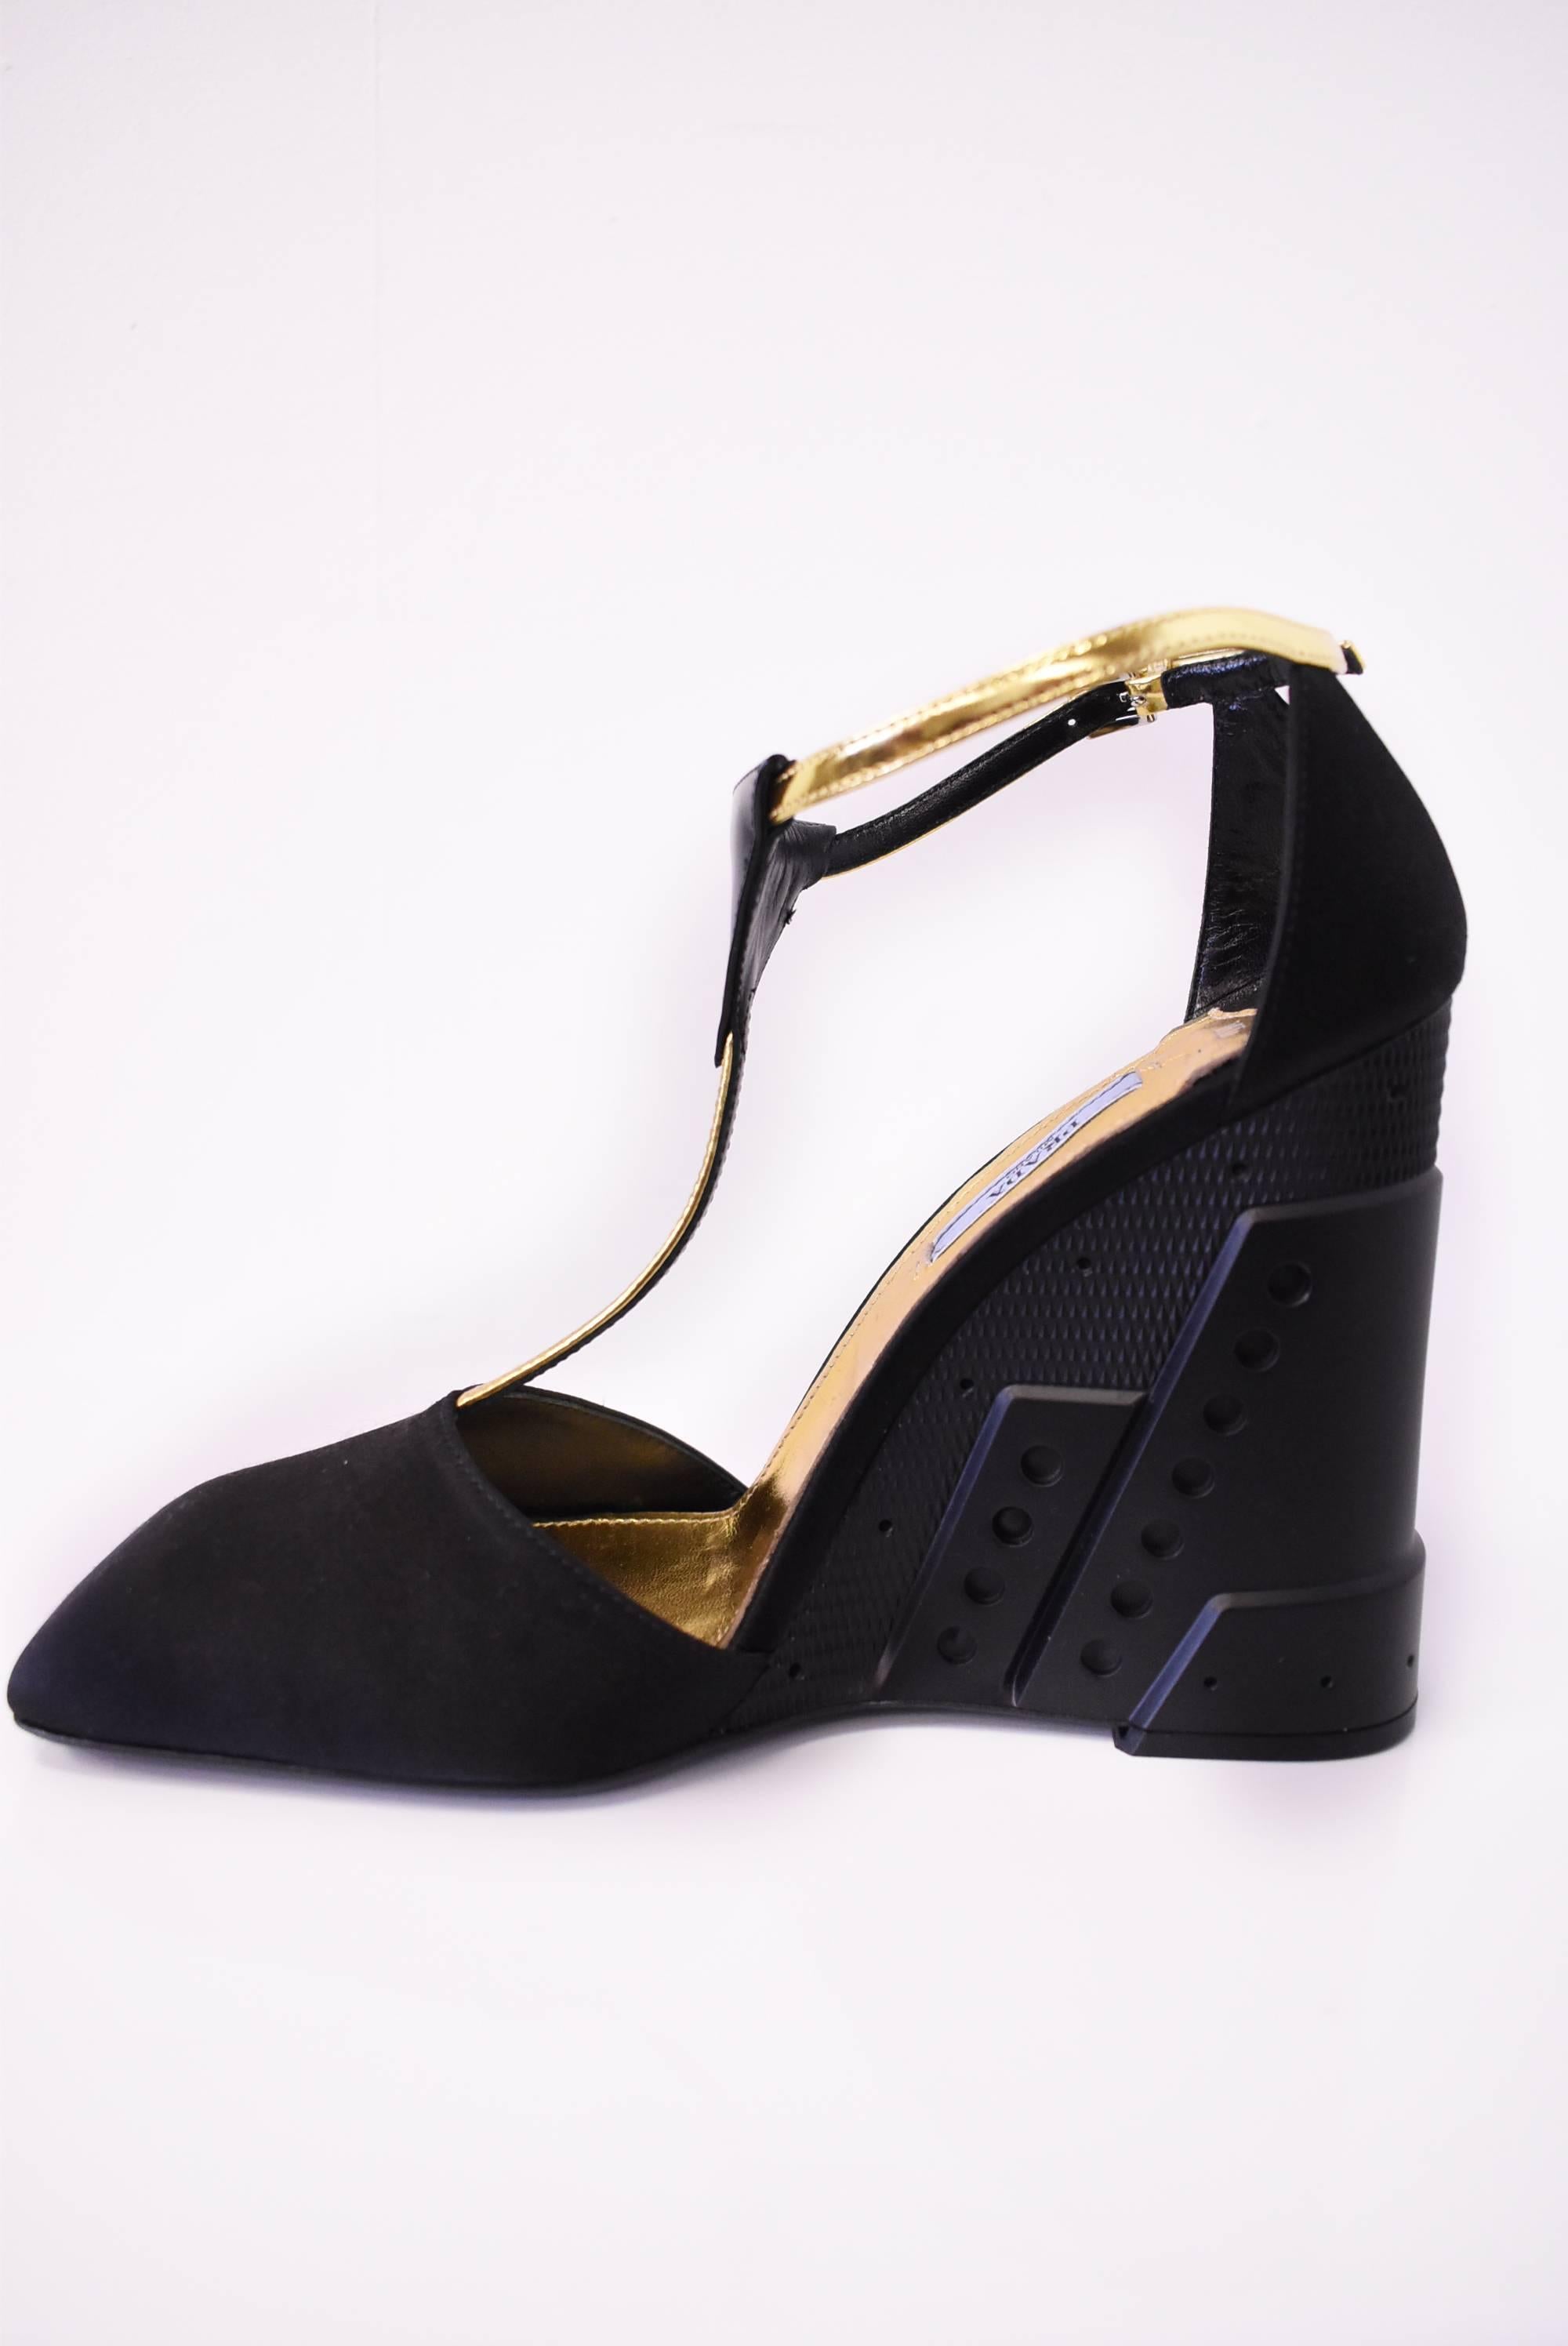 Prada Black Wedge Shoes with Gold Ankle Strap Unworn with Box and Dustbag A/W 14 For Sale 2